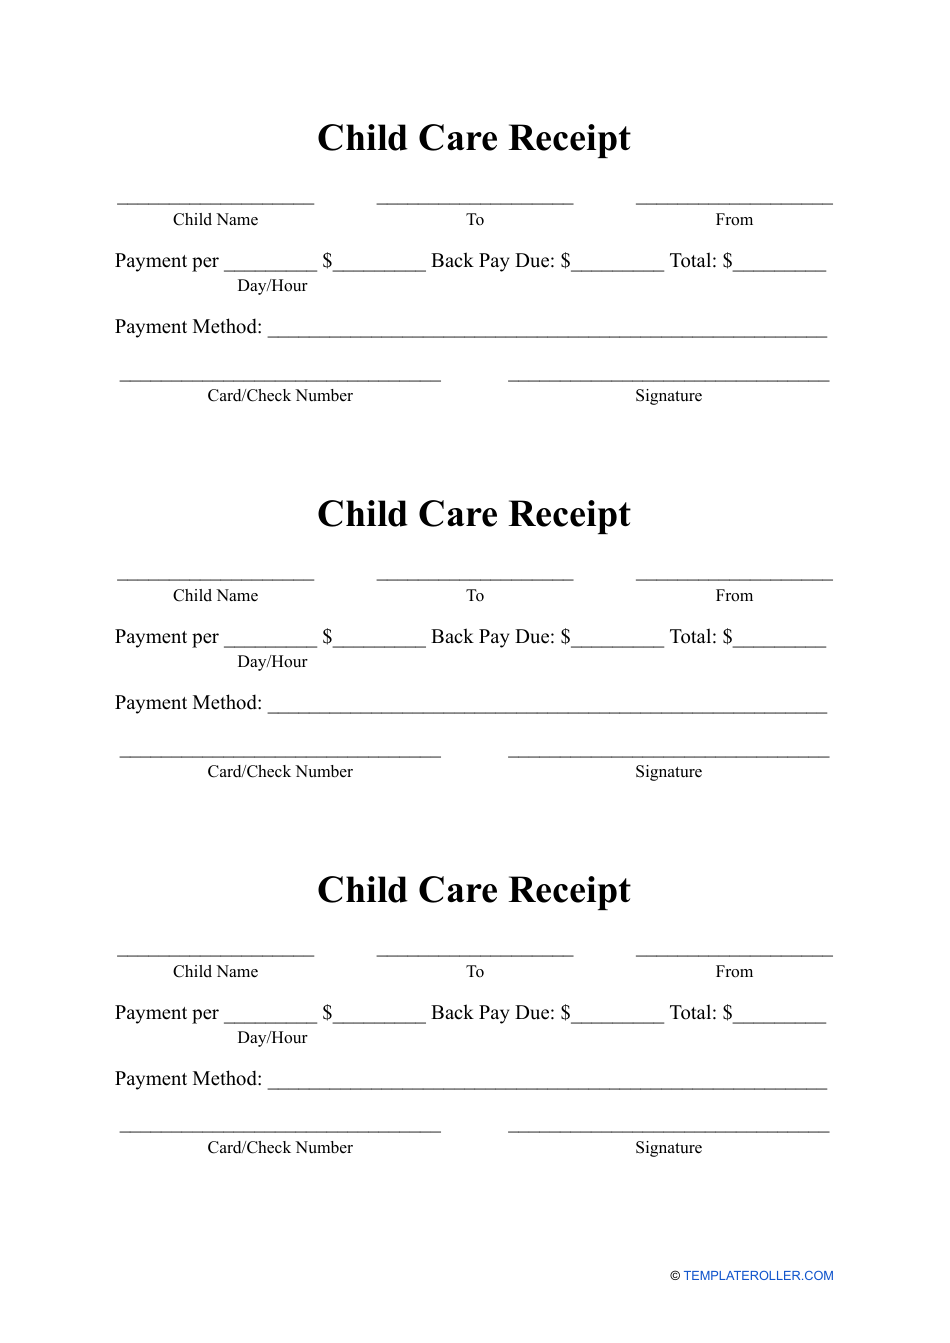 fantastic-daycare-receipt-for-taxes-template-google-awesome-receipt-5